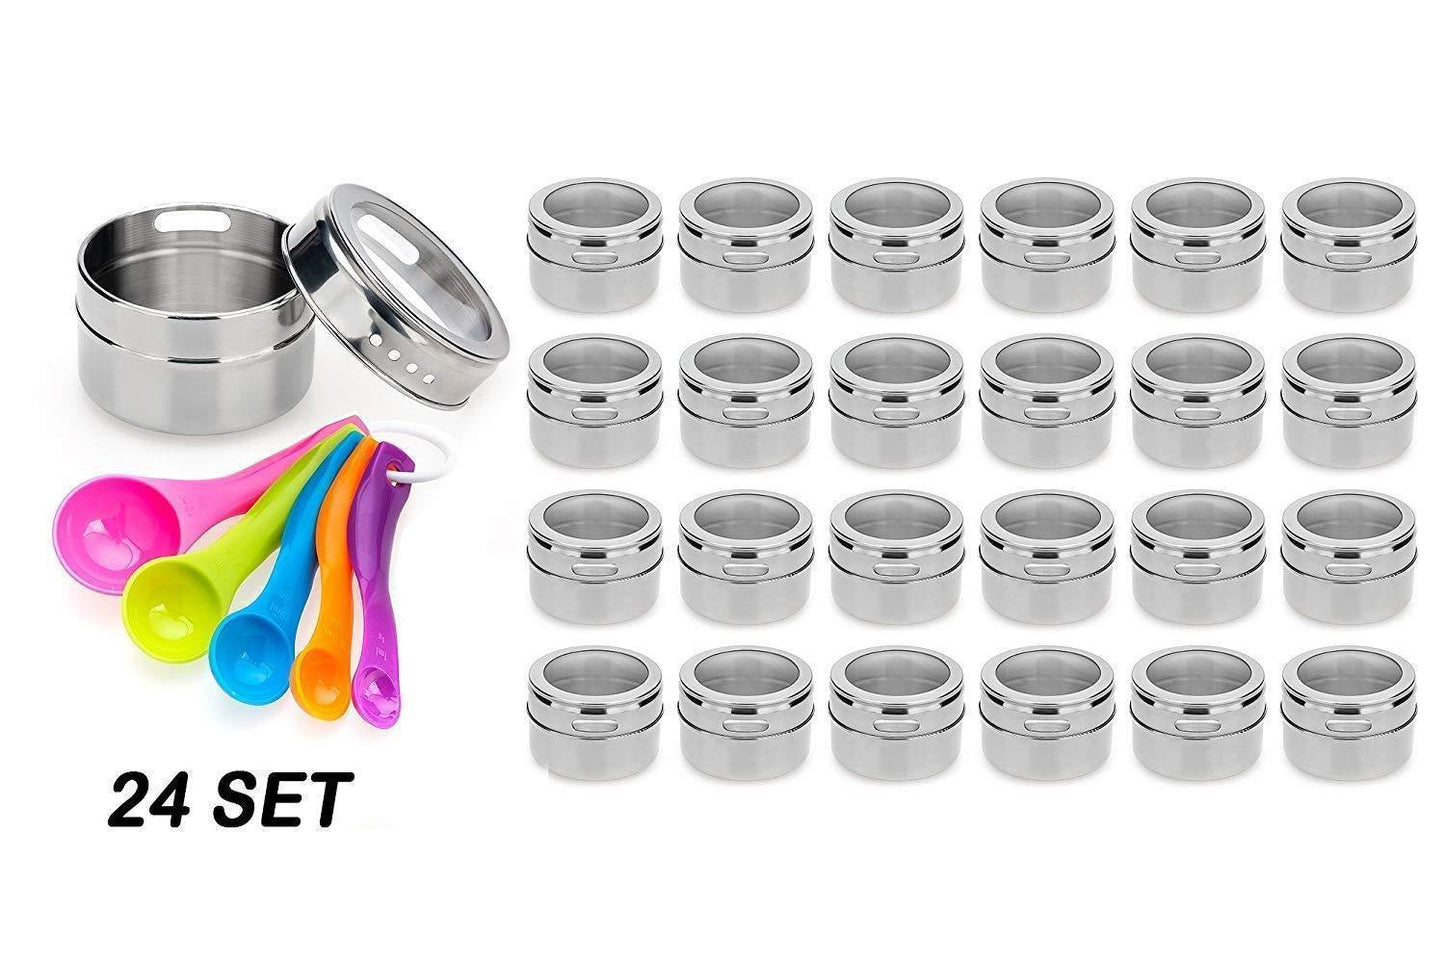 Storage nellam stainless steel magnetic spice jars bonus measuring spoon set airtight kitchen storage containers stack on fridge to save counter cupboard space 24pc organizers